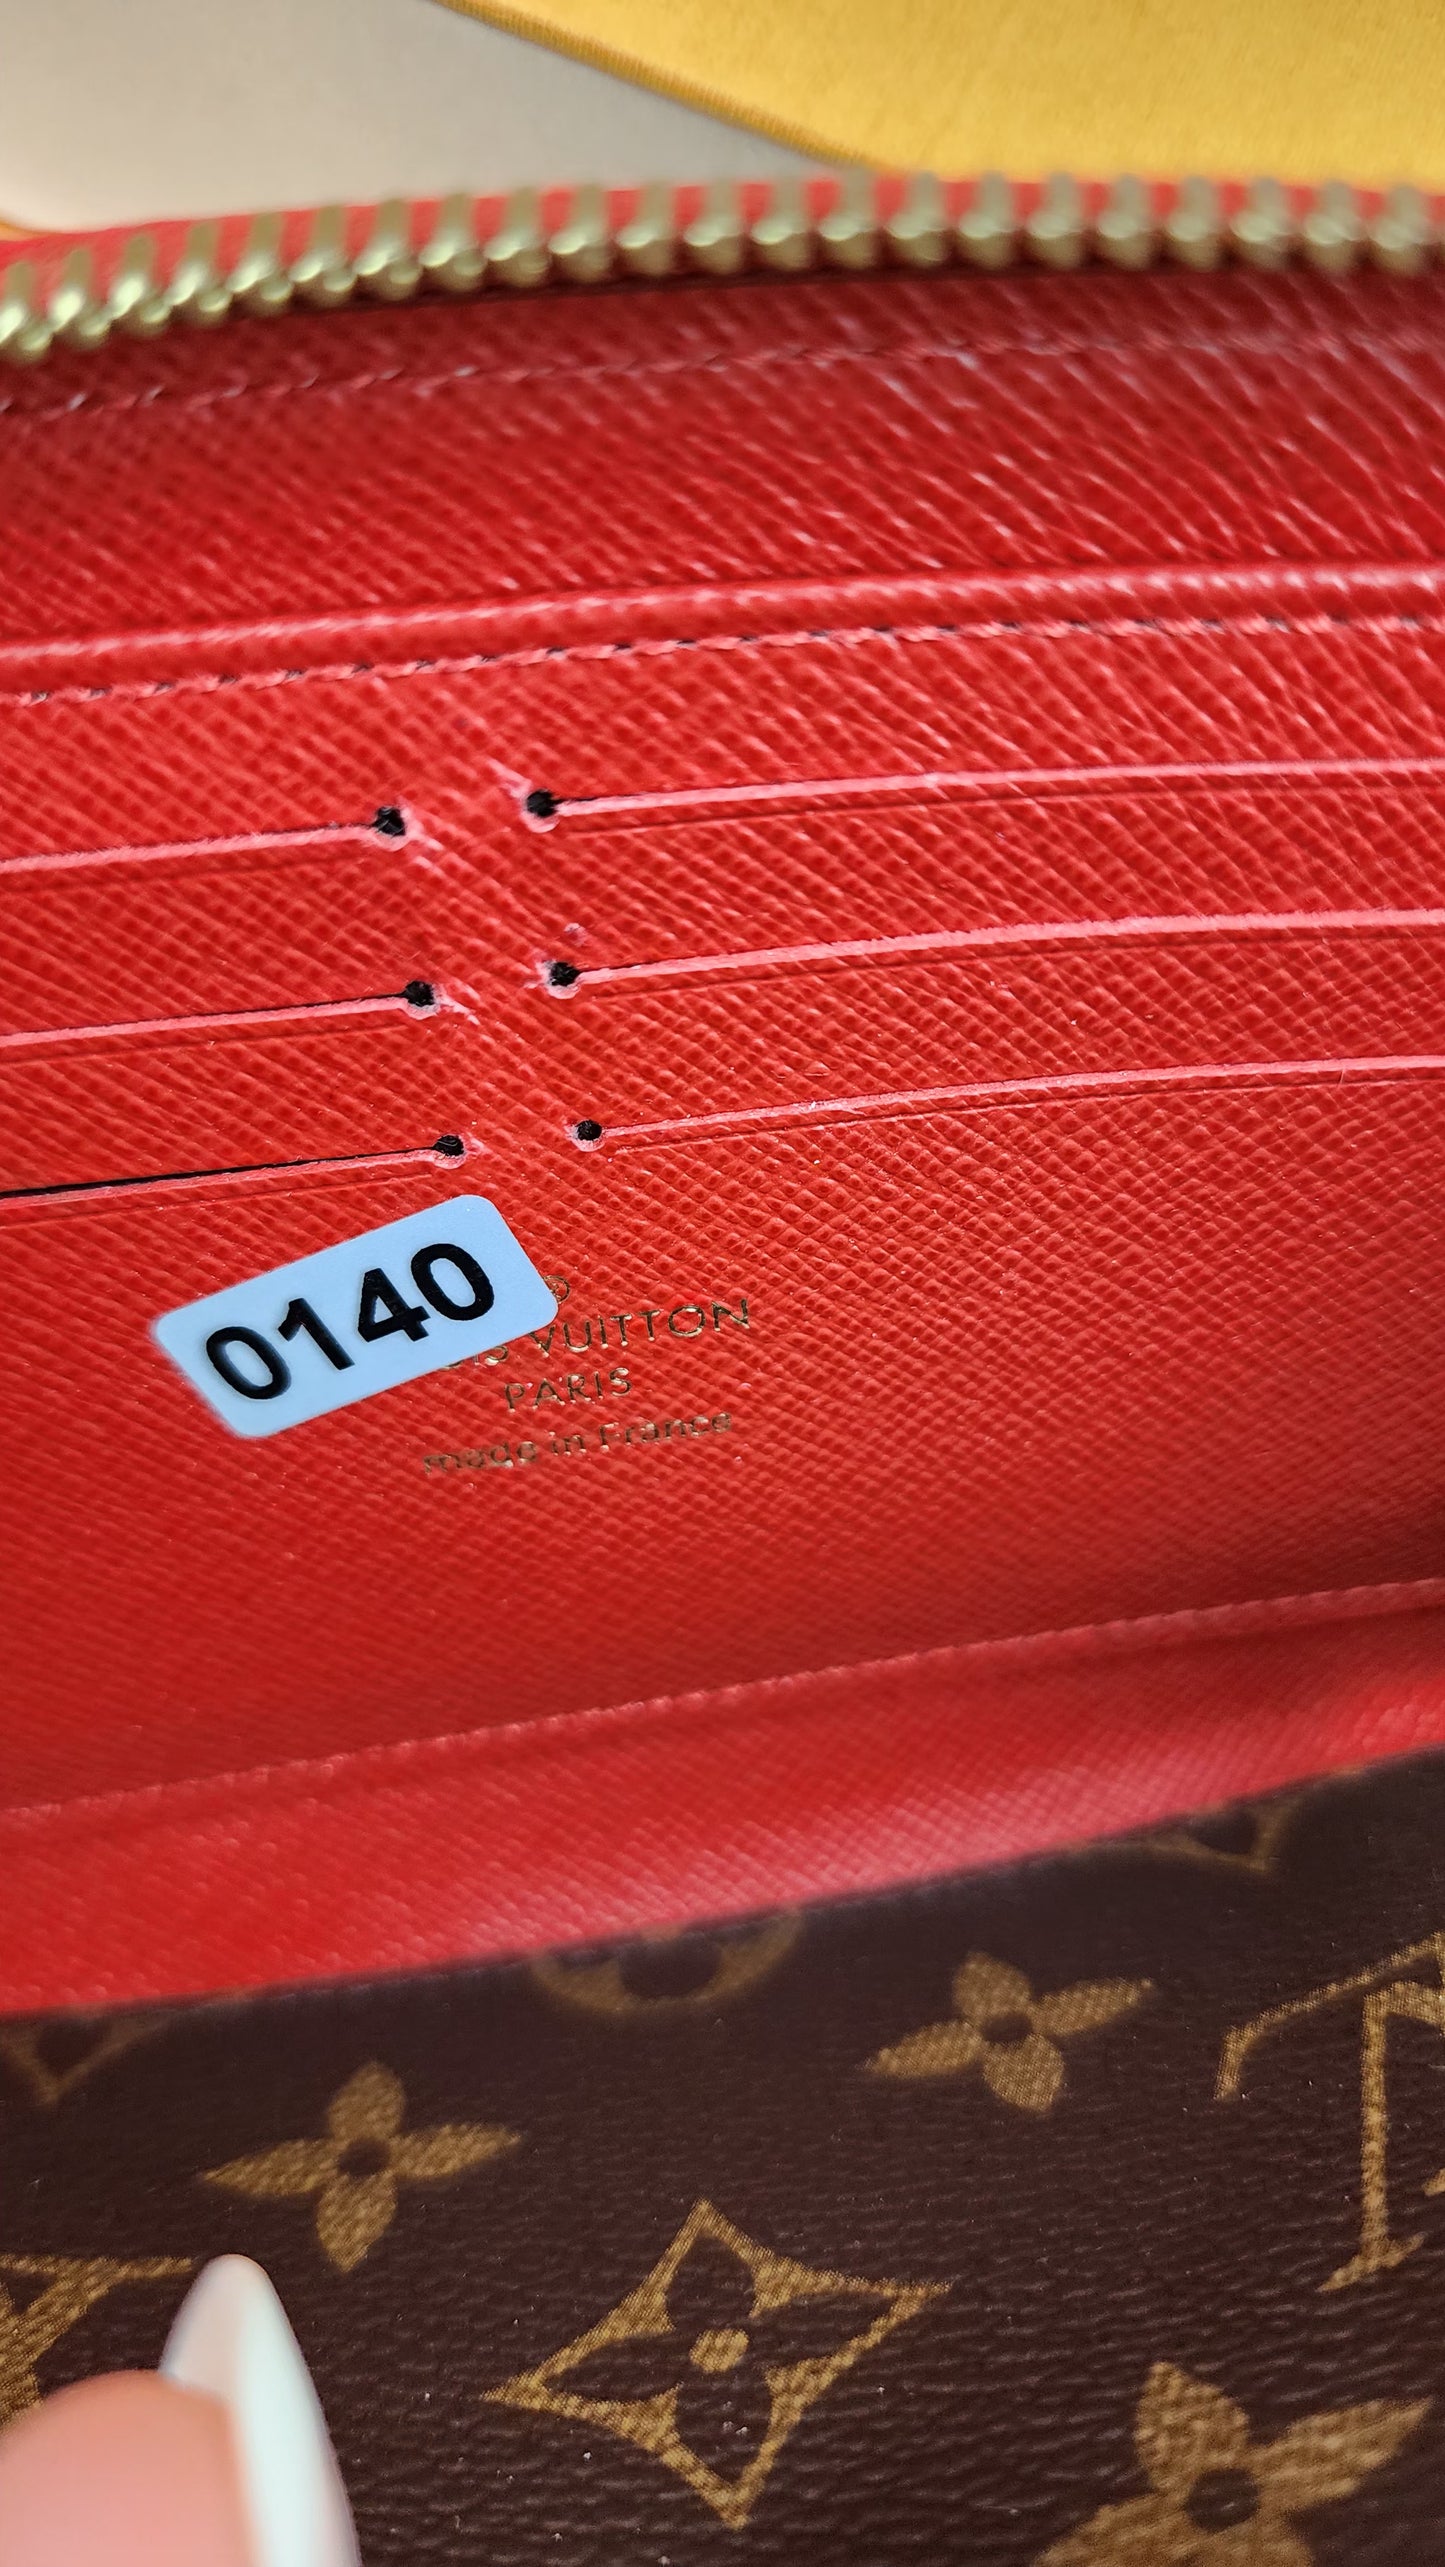 Louis Vuitton Monogram and Red Zippy Wallet - Full Inclusion